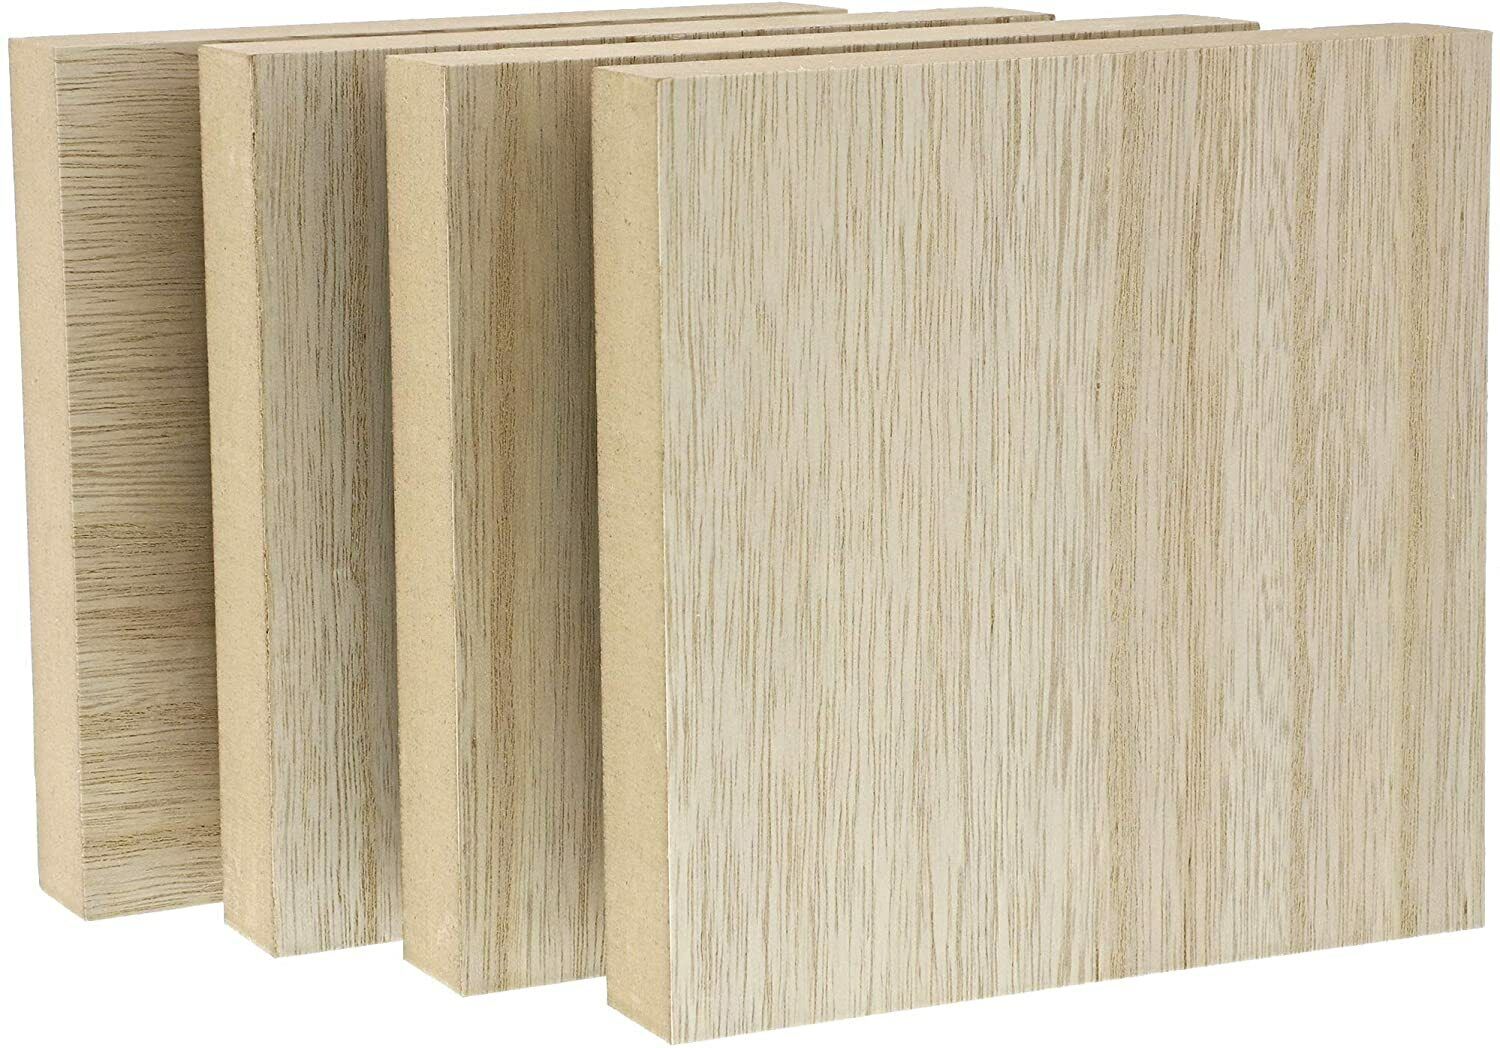 4 Pack,  BASSWOOD Unfinished Wood Blocks for DIY Crafts, Square Block 6 x 6 x 1  EXOTIC WOOD ZONE Does Not Apply